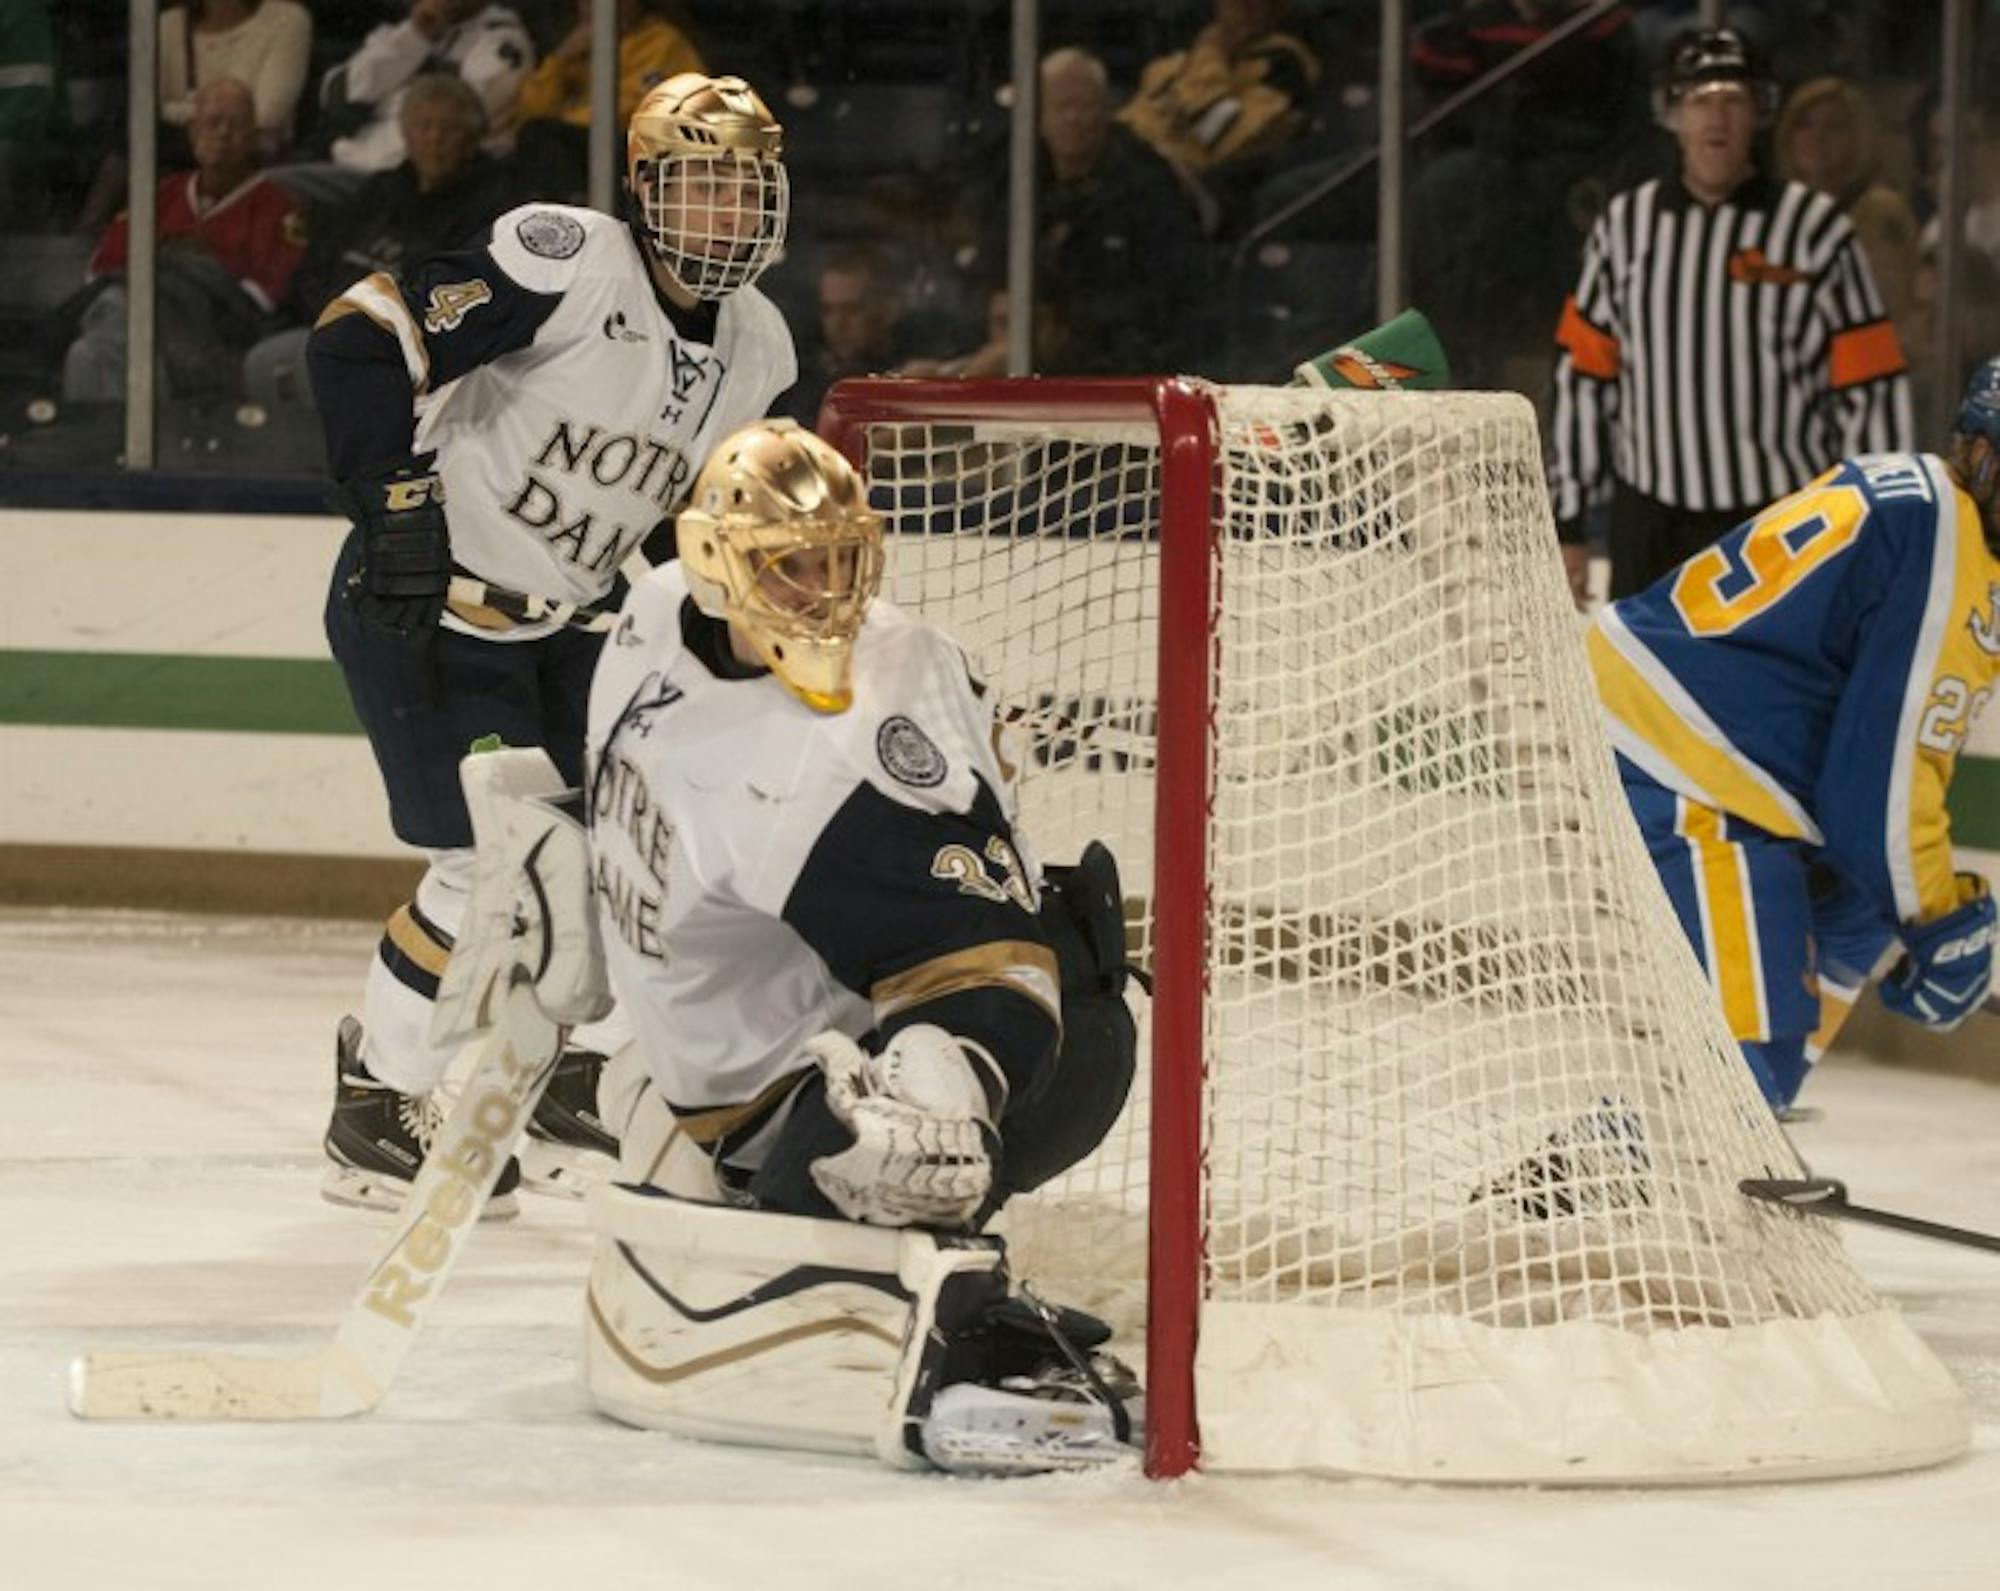 Irish sophomore goalkeeper Chad Katunar watches a shot fly by during Notre Dame’s 5-3 win over Lake Superior State on Oct. 17.